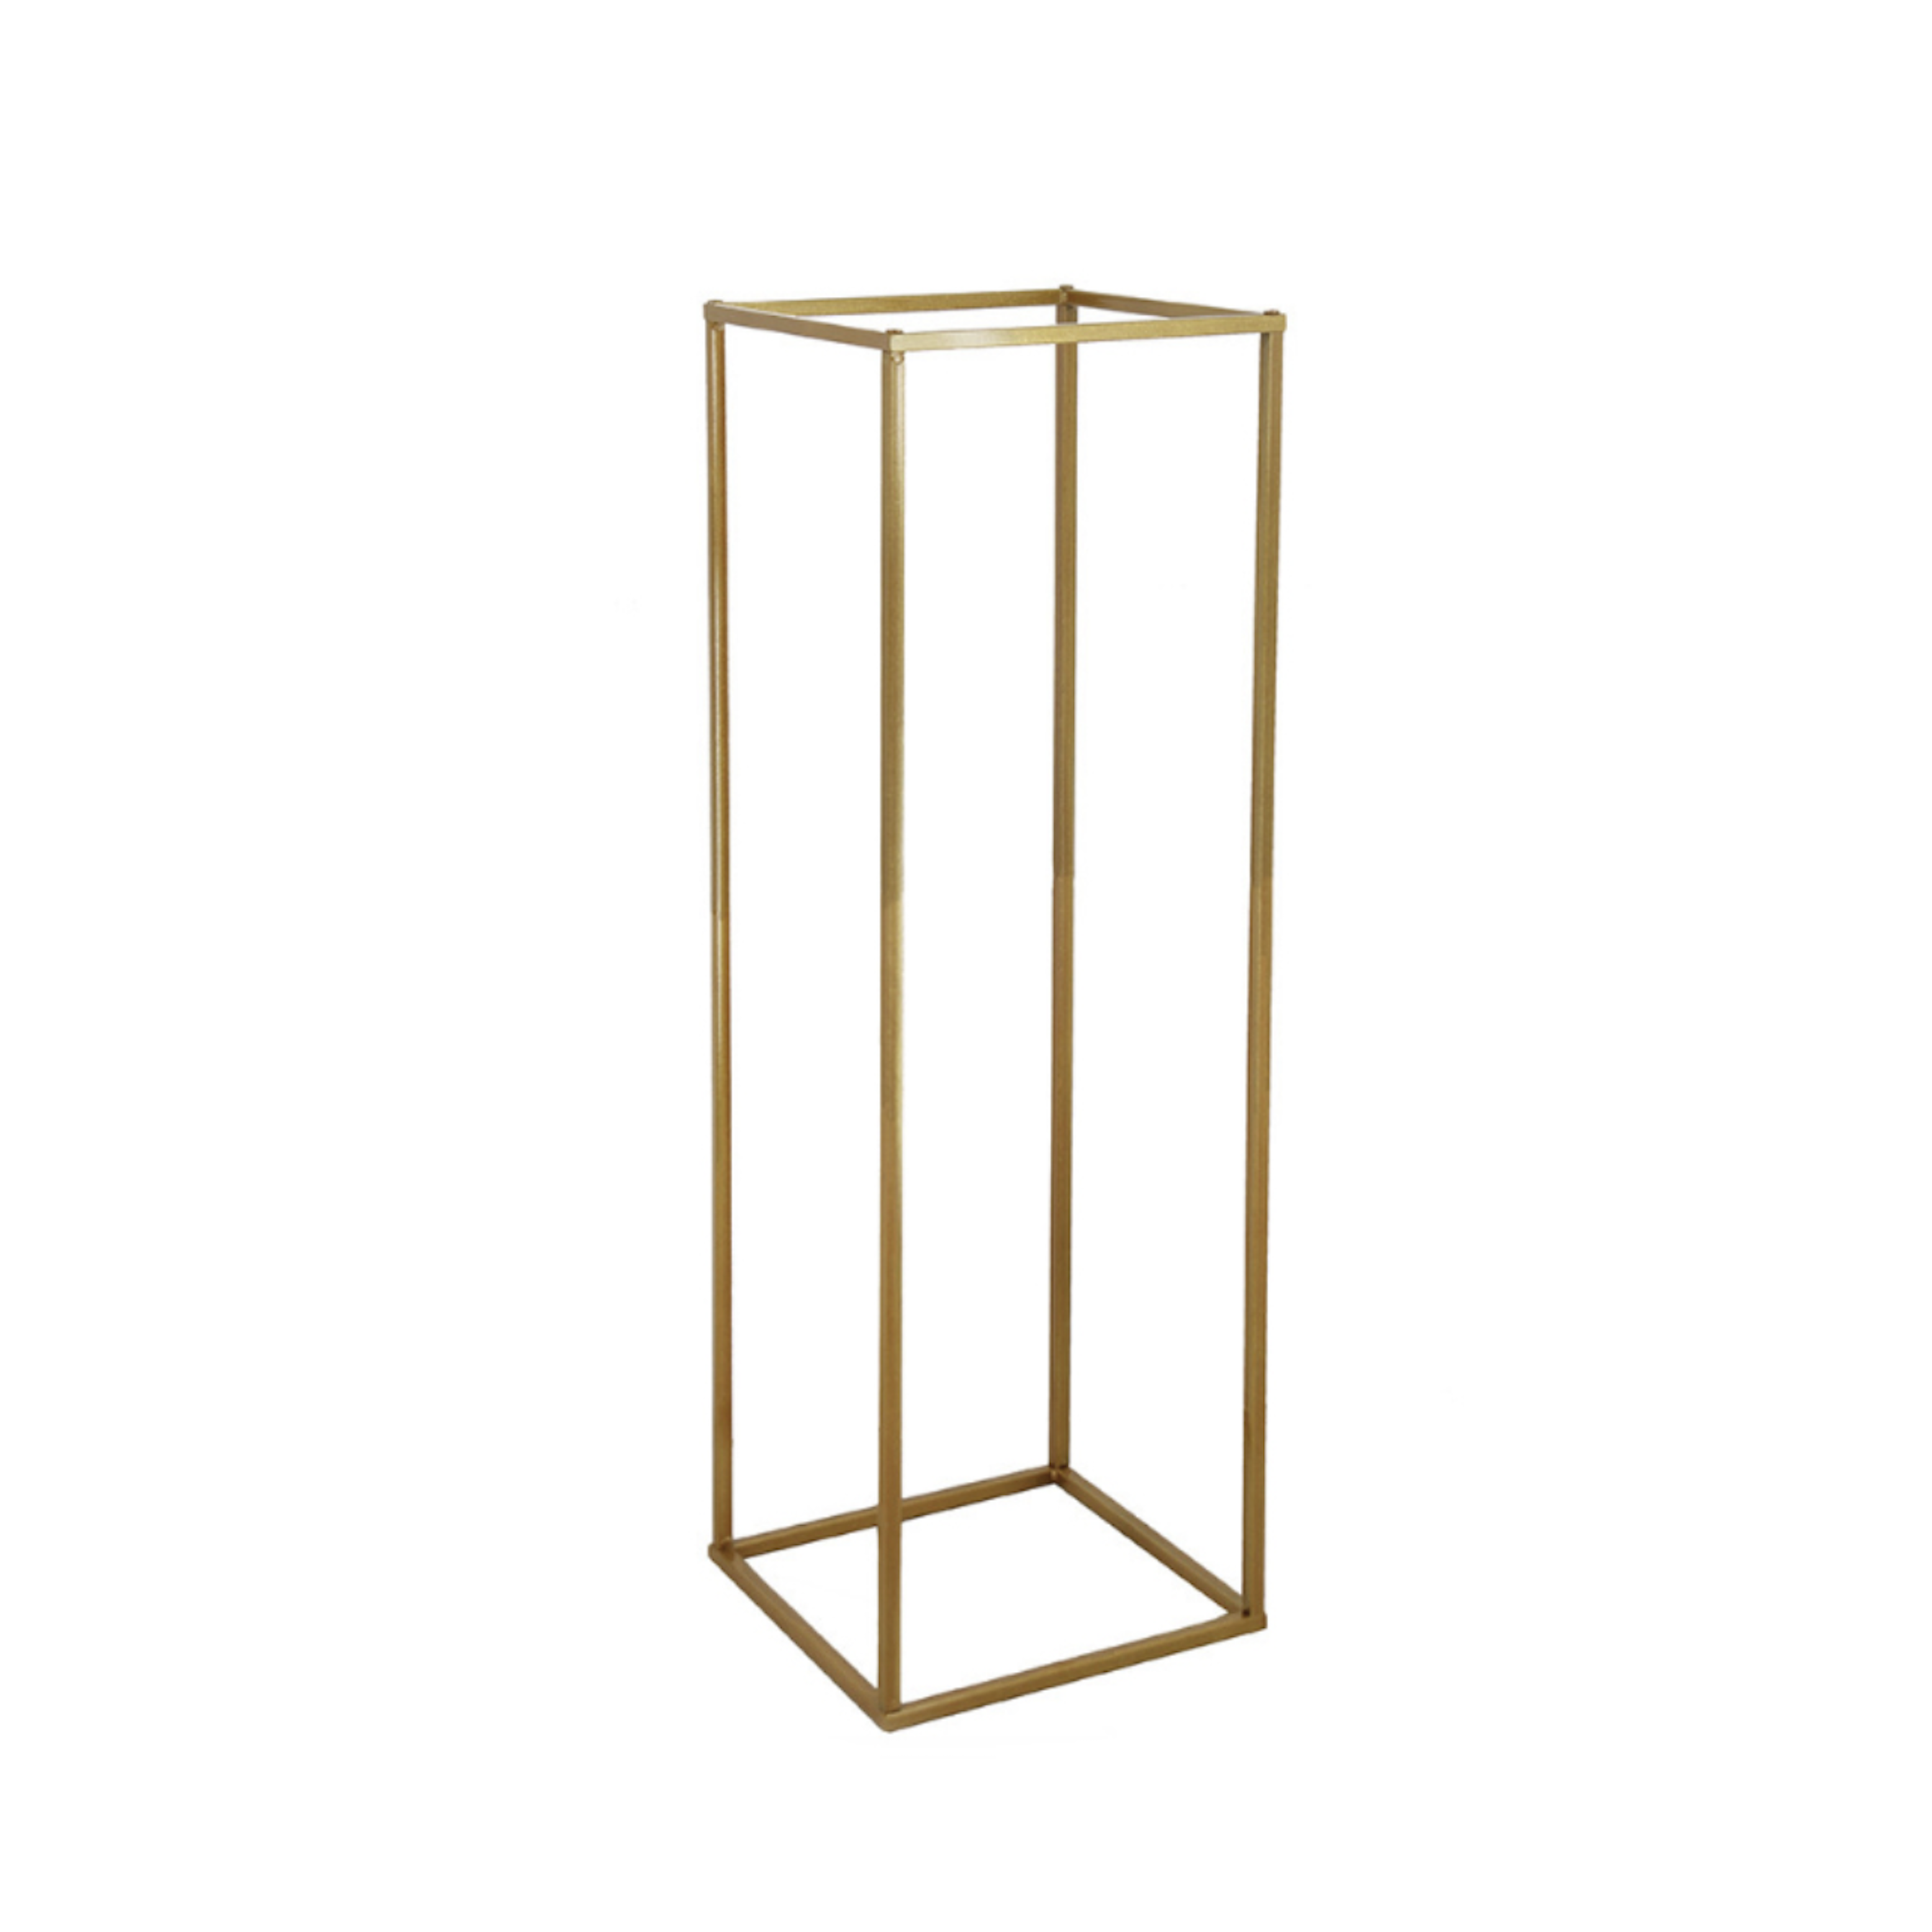 10A. PEDESTAL FRAMES, GOLD OR WHITE (drop down colour options- gold and white